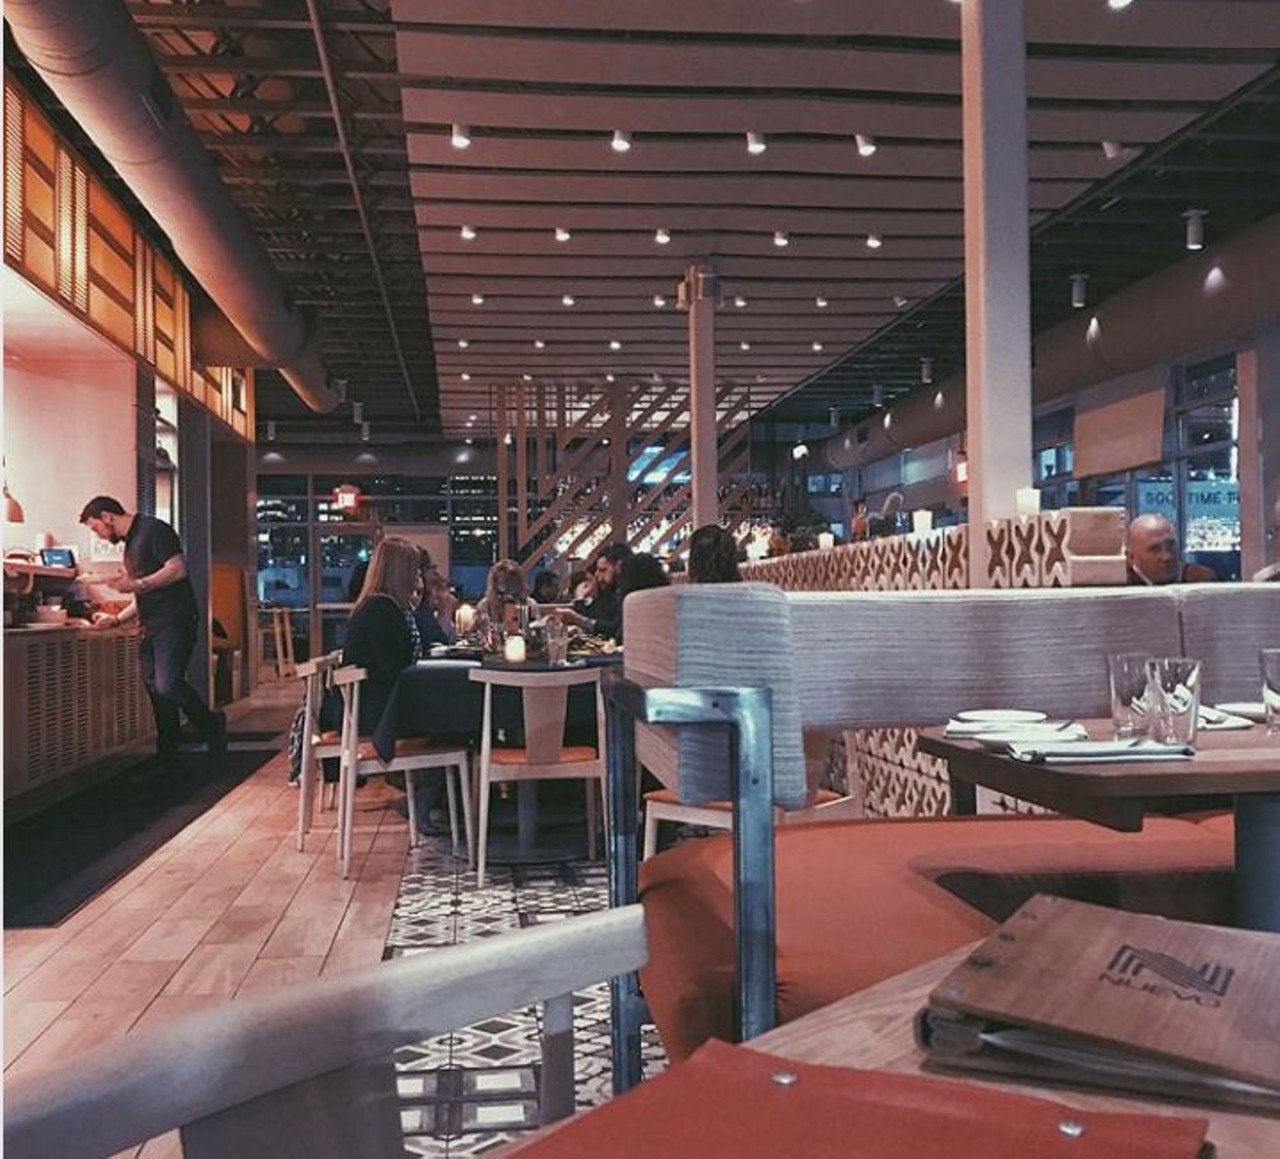 Neuvo Modern Mexican
1000 East 9th St., Cleveland 
With its proximity to downtown, the waterfront, and, of course, one of those Cleveland Signs you see all over social media, Neuvo offers the best views for a post-meal photo shoot.
Photo via theebonyjames_/Instagram